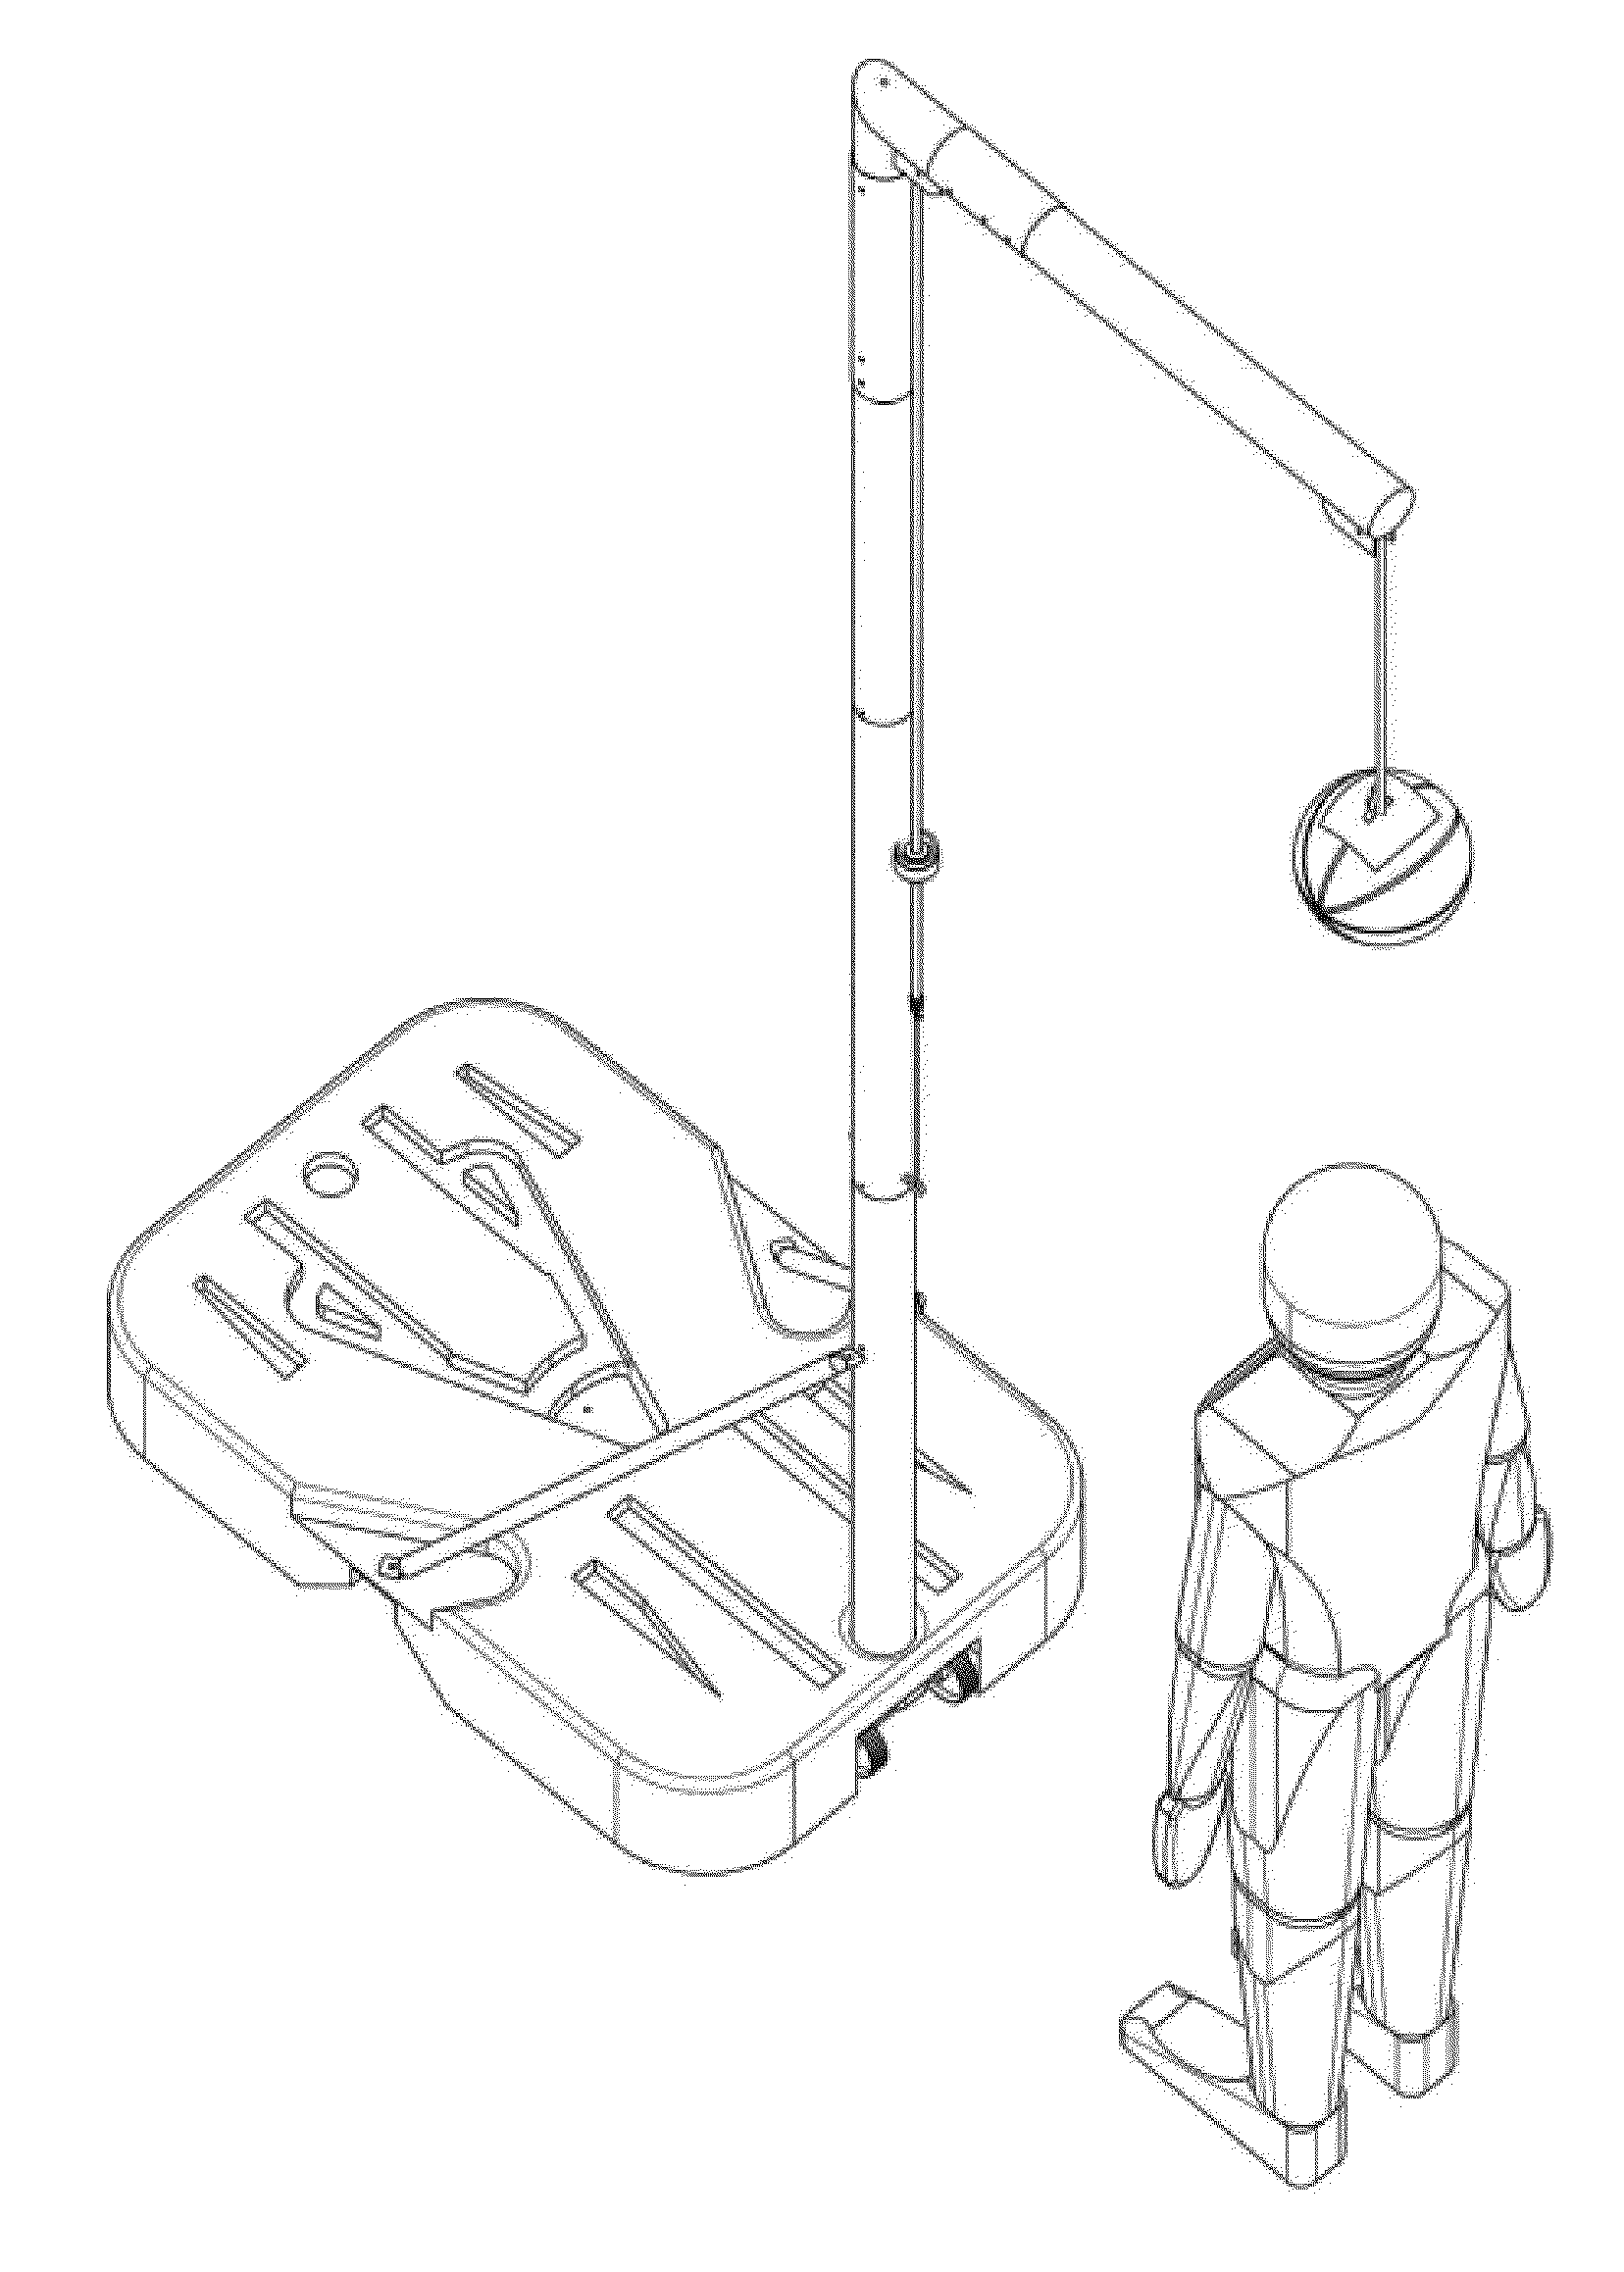 Exercise Apparatus for Improvement of Vertical Leaping Ability